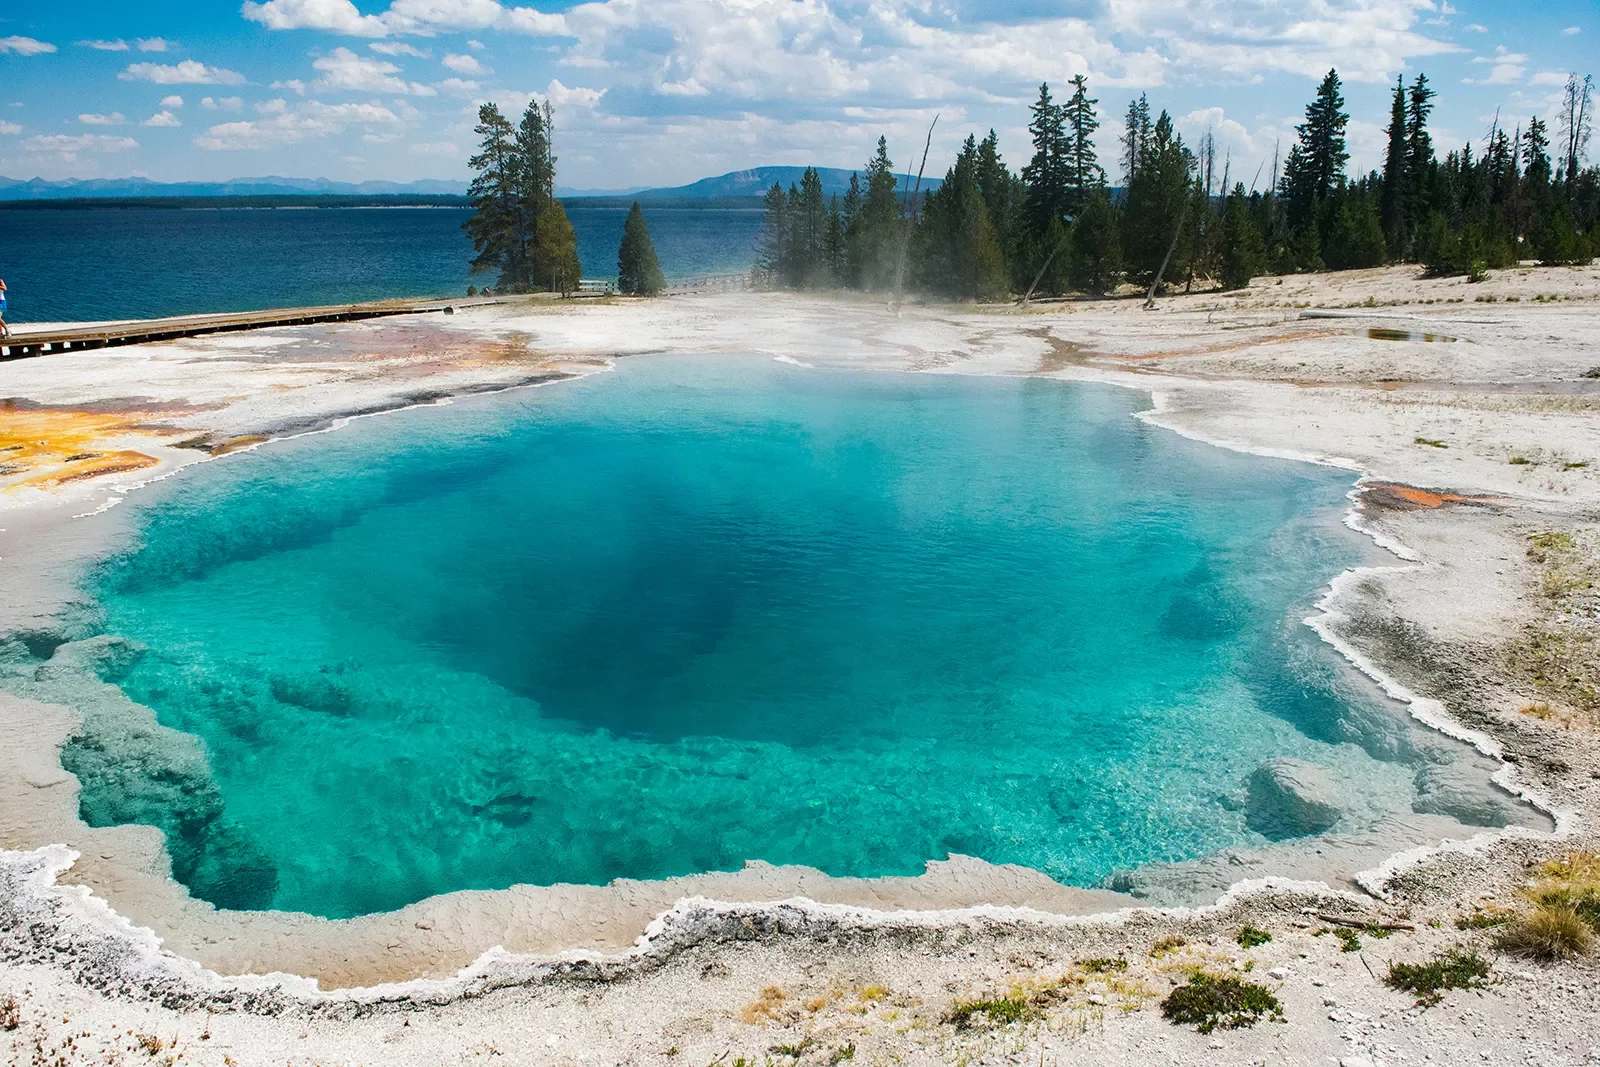 Turquoise hot spring and surrounding pine trees